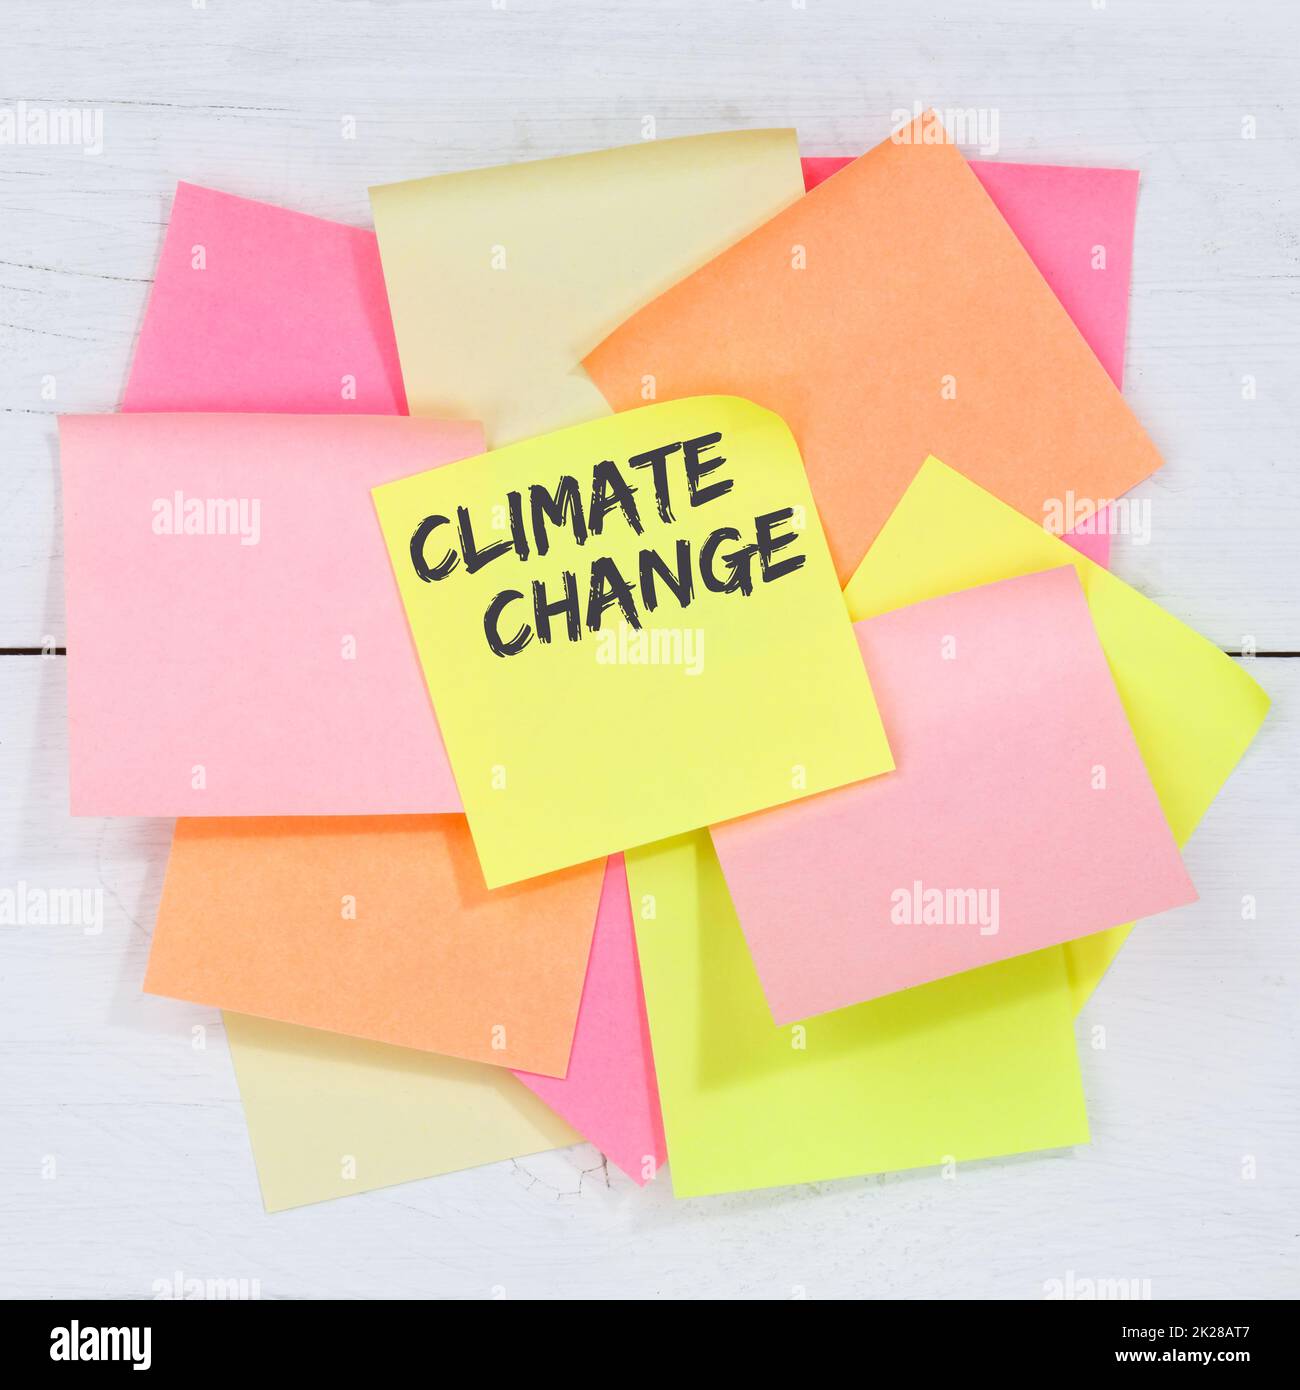 Climate change CO2 clean air protection environment nature desk note paper Stock Photo